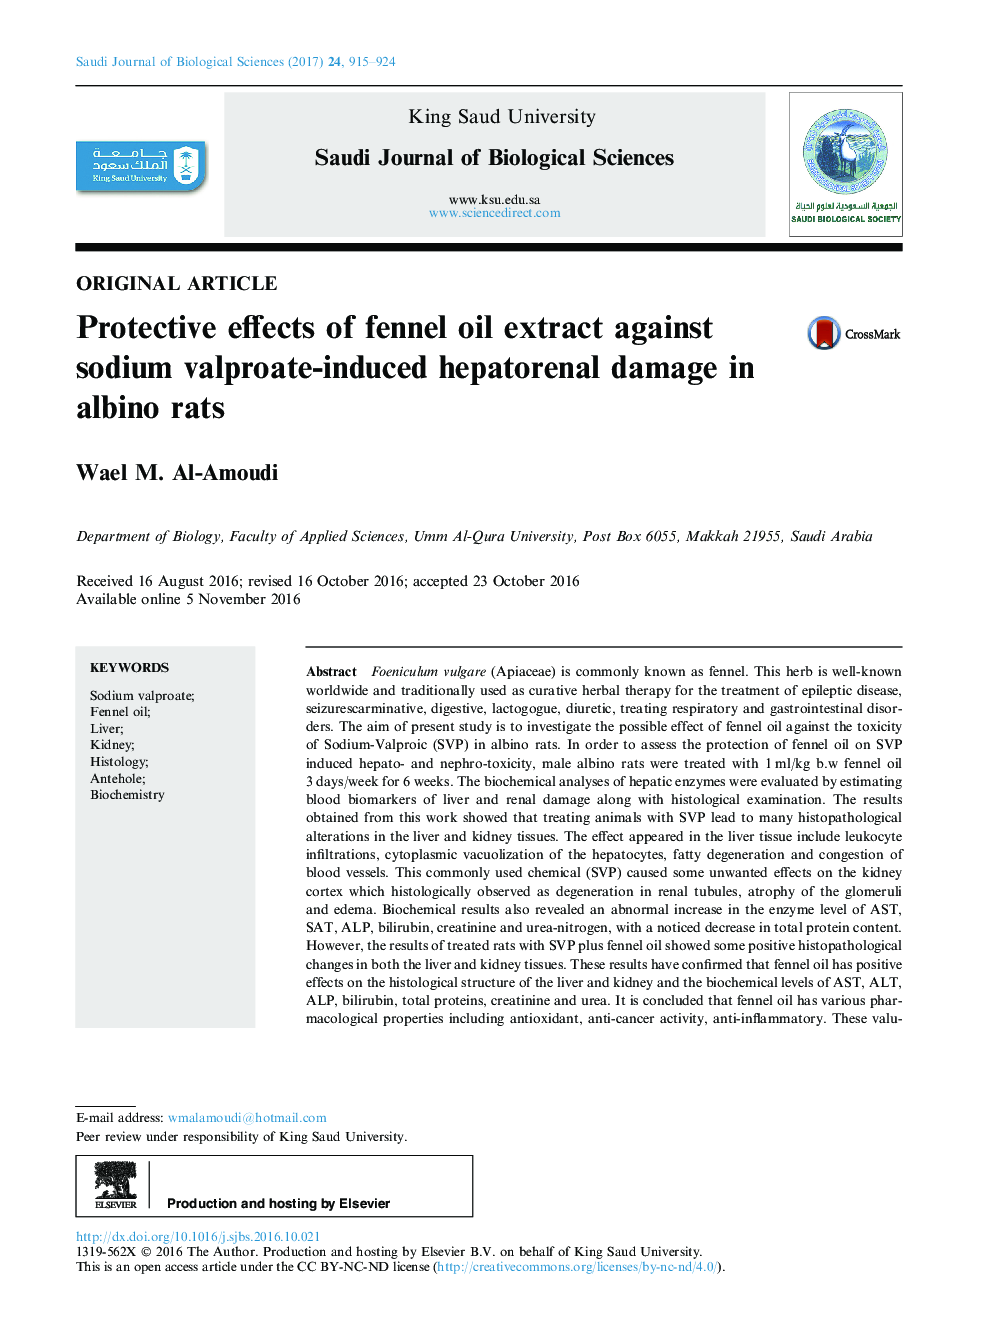 Original articleProtective effects of fennel oil extract against sodium valproate-induced hepatorenal damage in albino rats